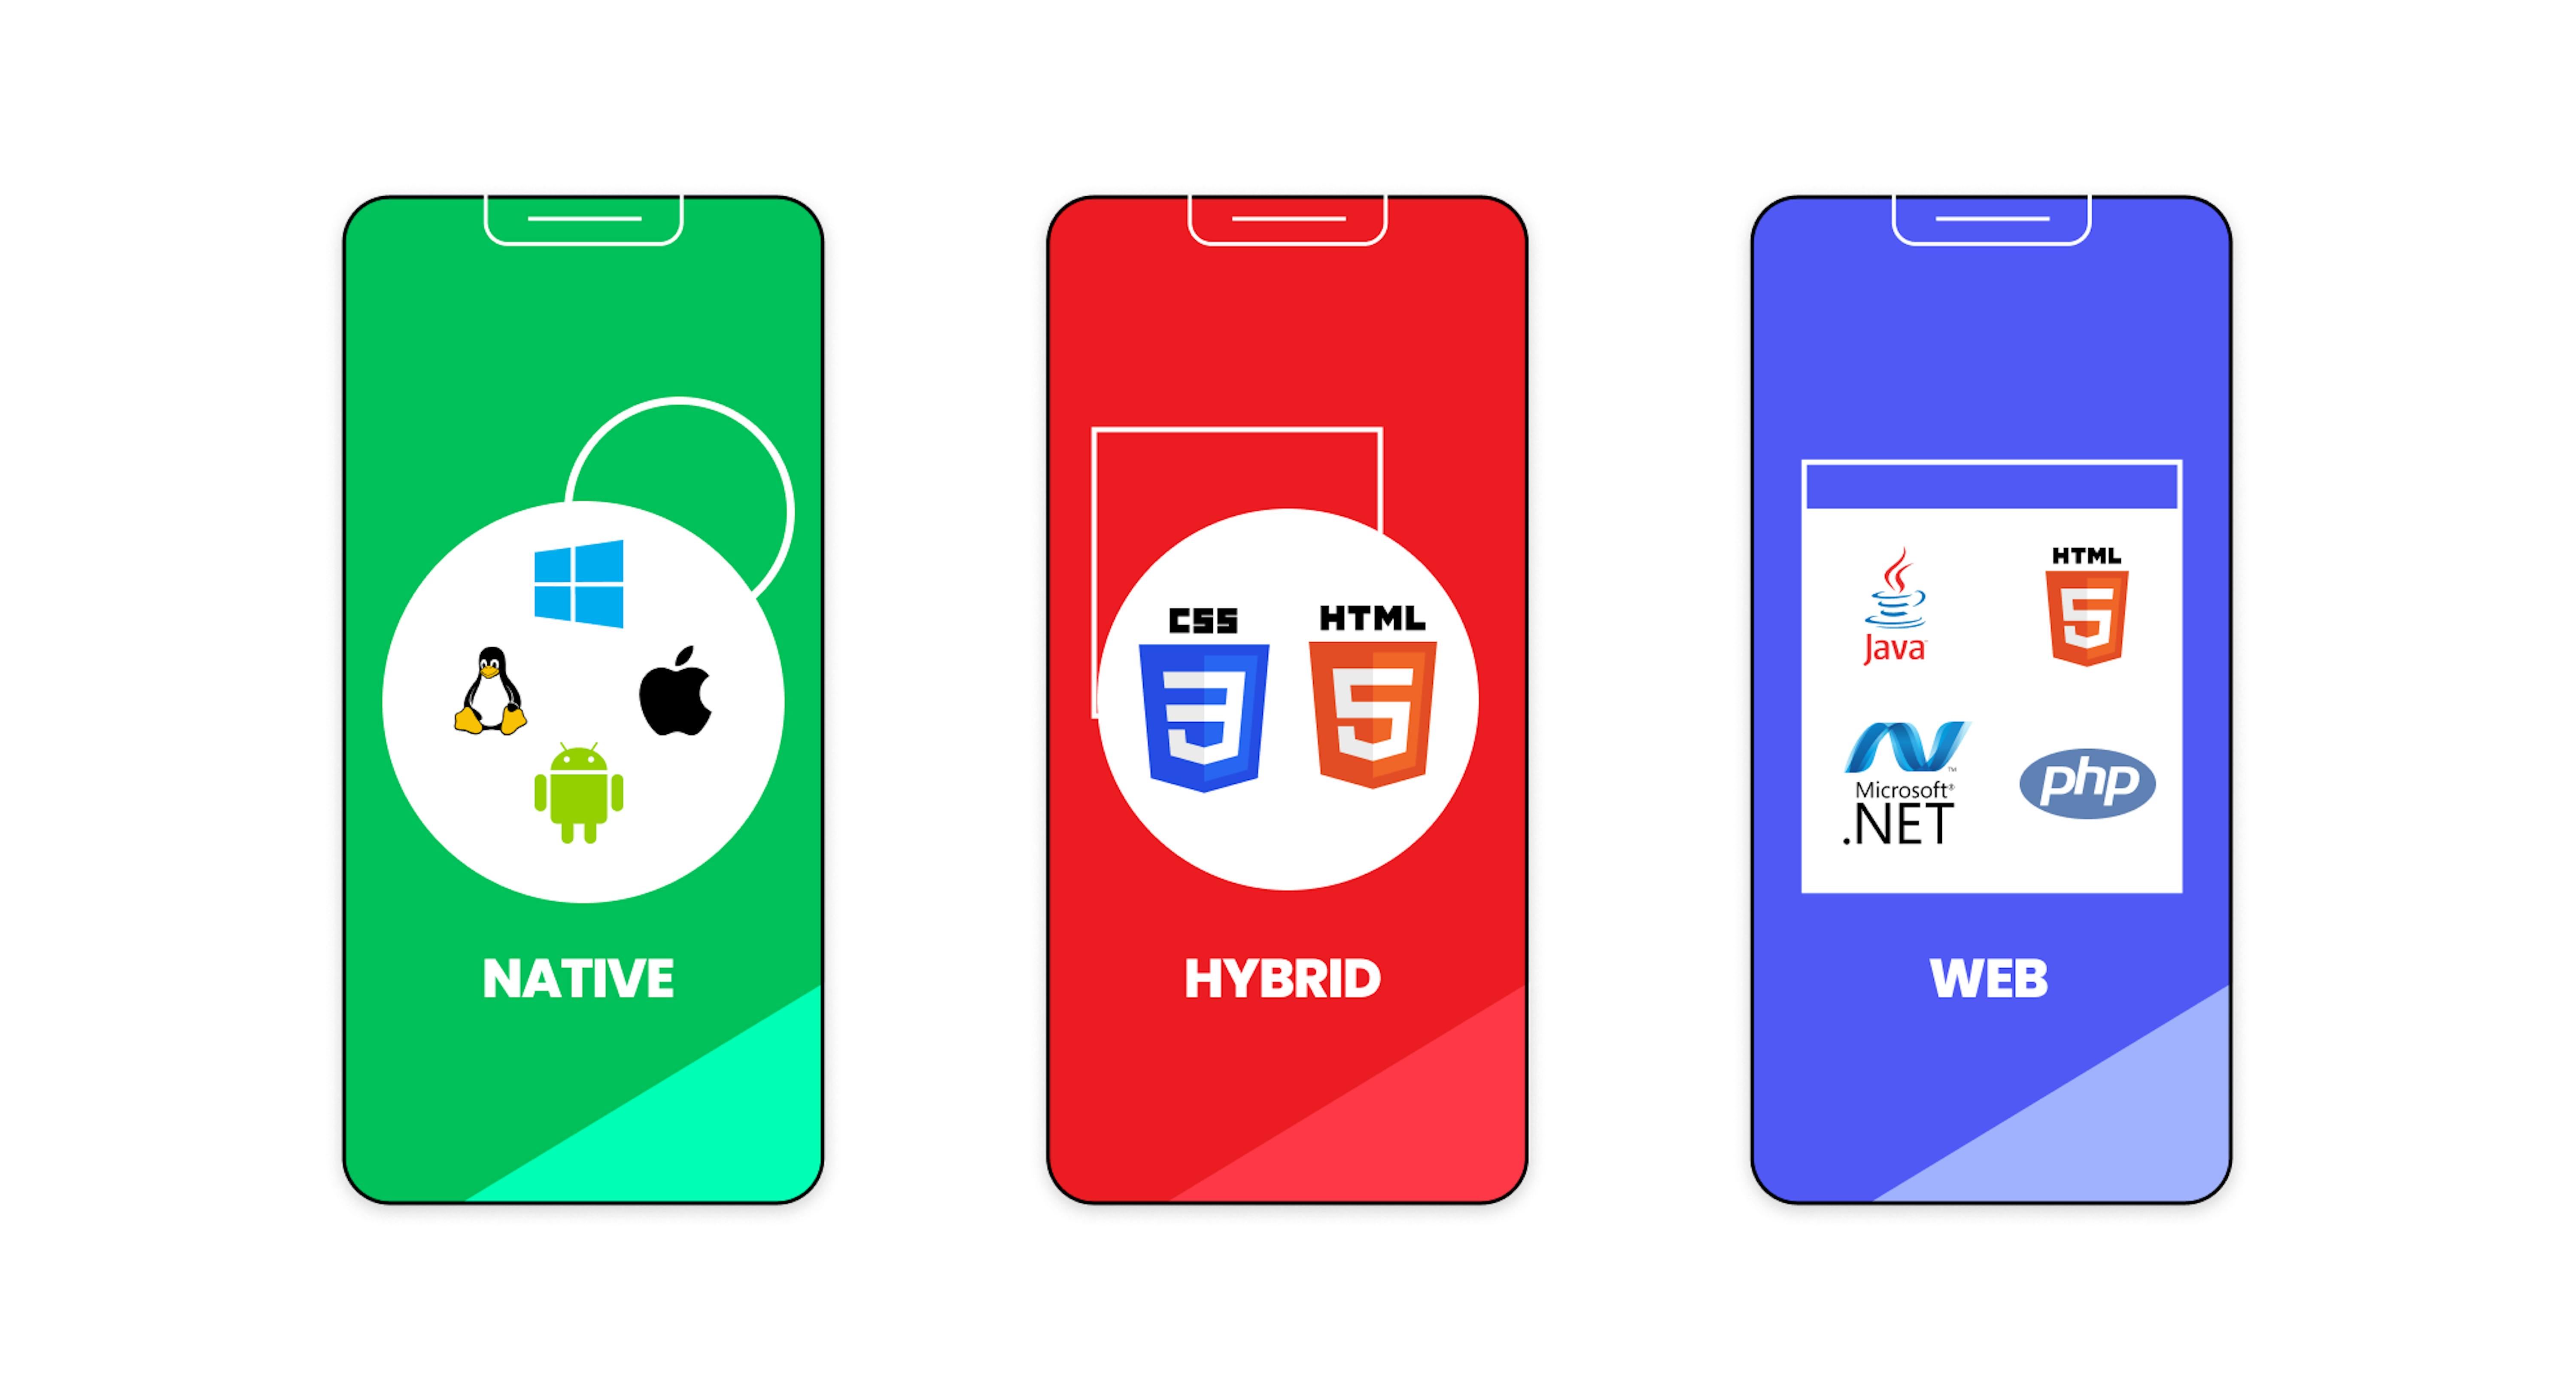 Three types of apps: native, hybrid, and web